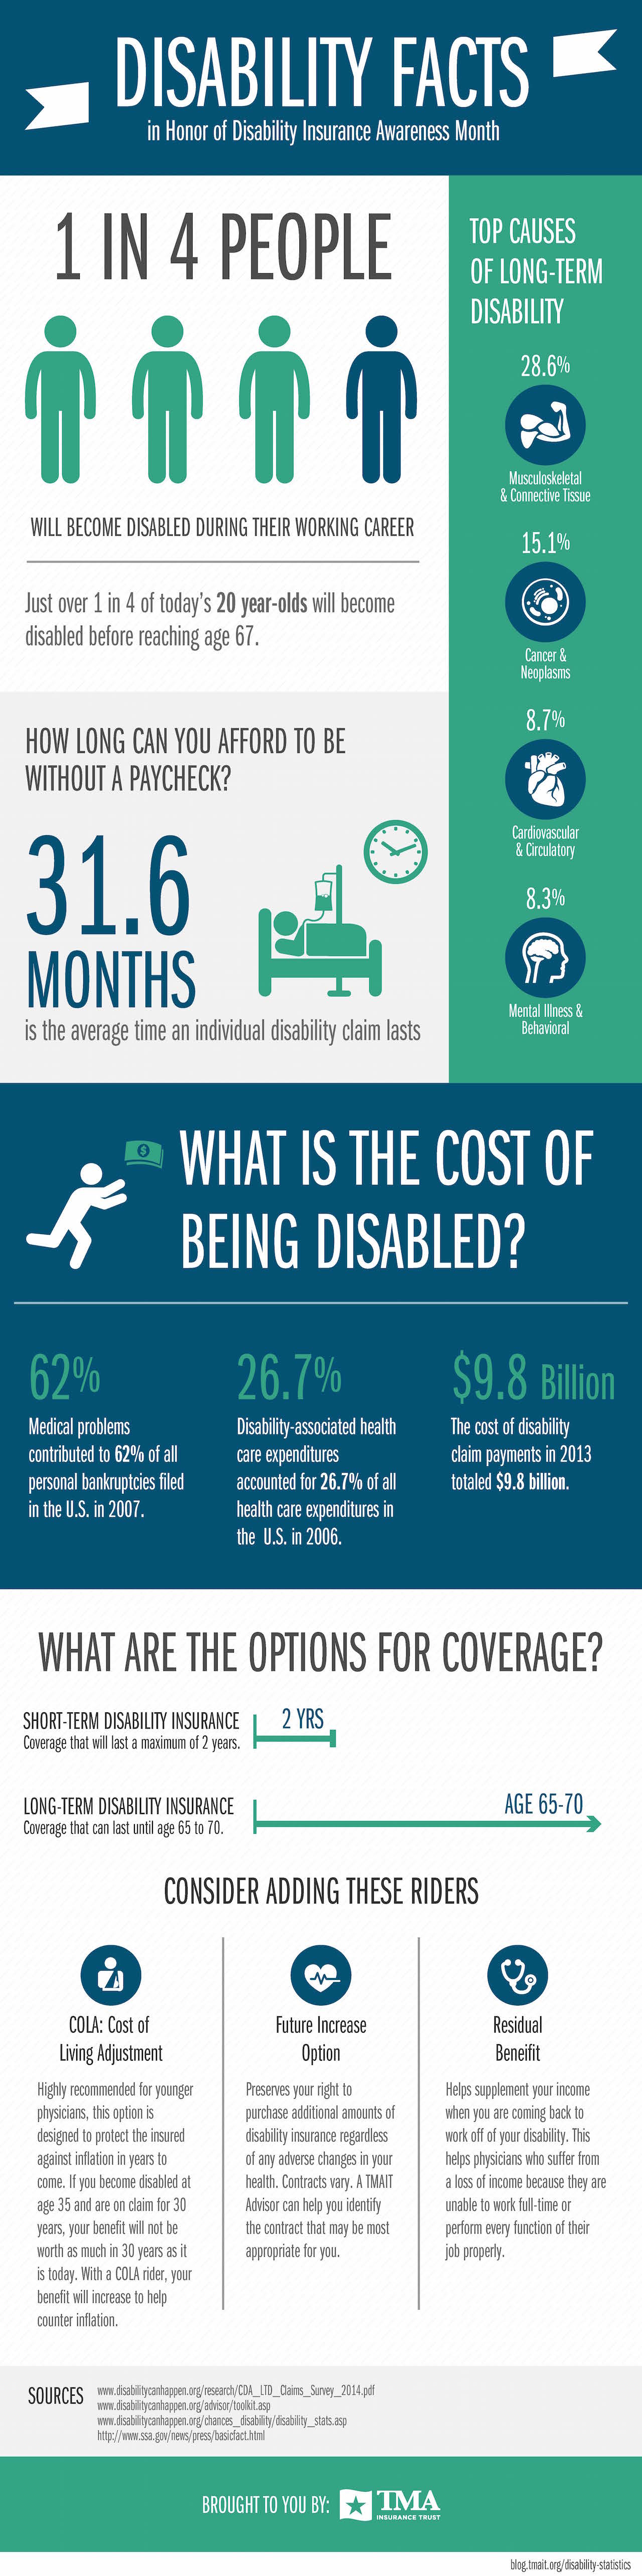 infographic_disability